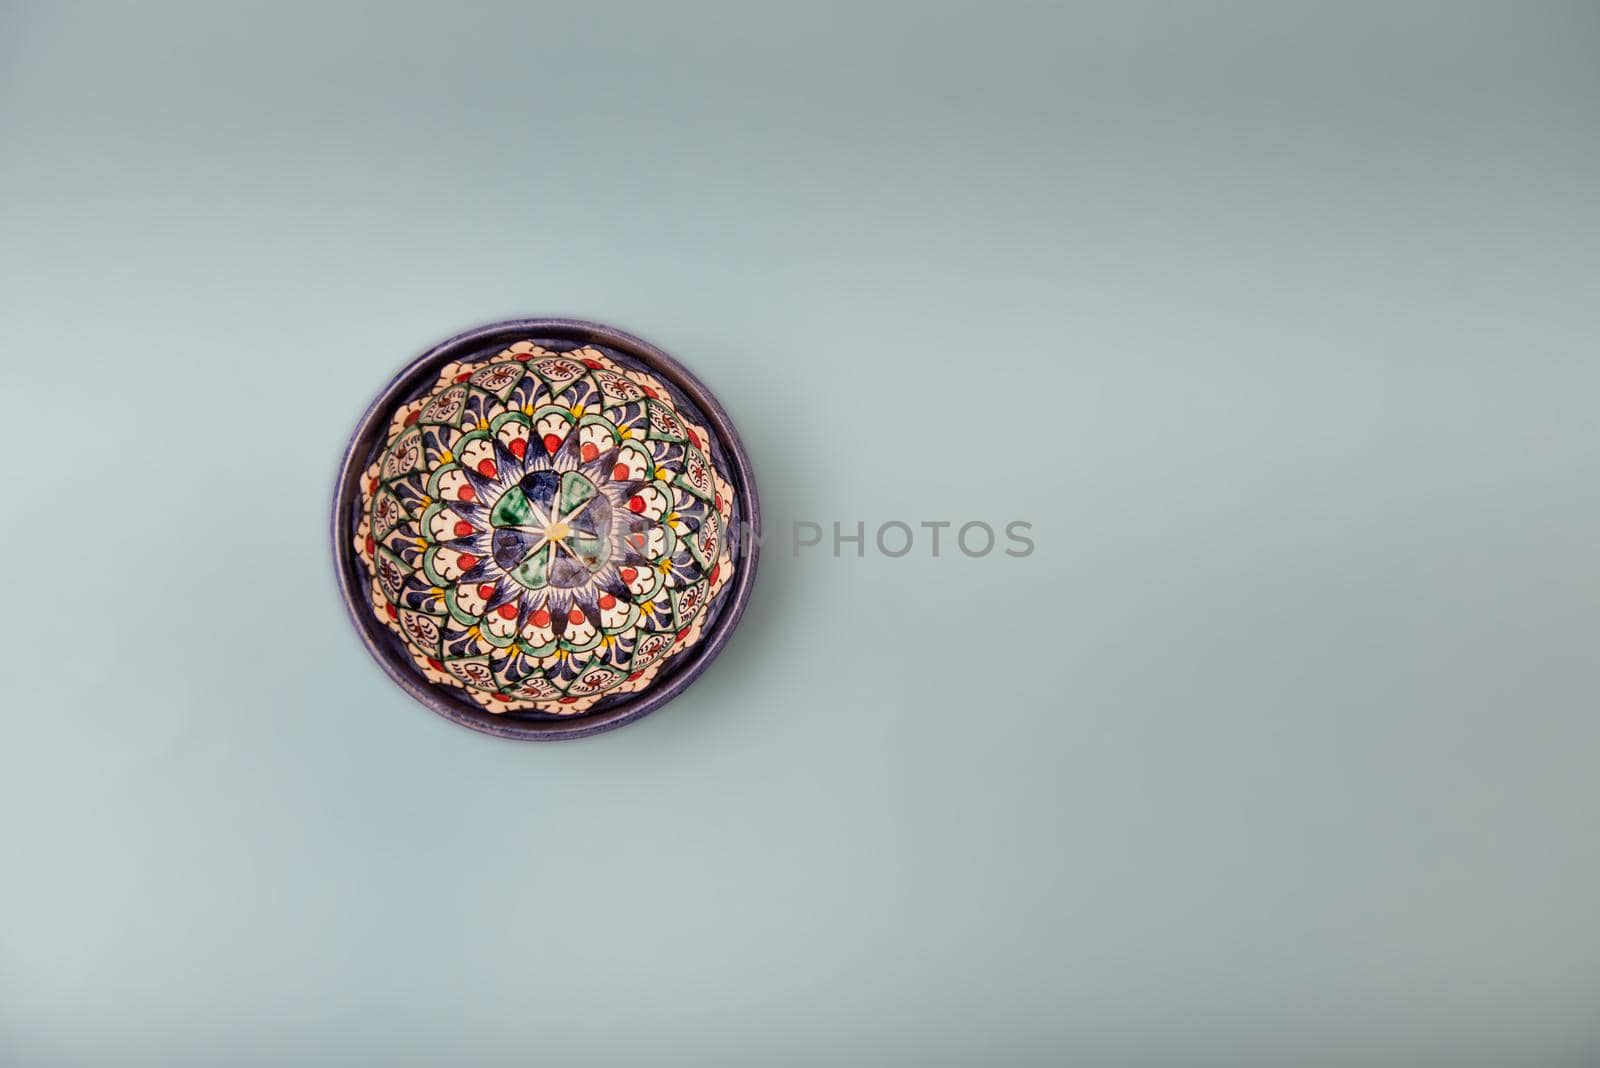 RUSSIA. MOSCOW. March 2020. Ethnic Uzbek ceramic tableware on the gray background. Decorative ceramic cup with traditional uzbekistan ornament. by marynkin